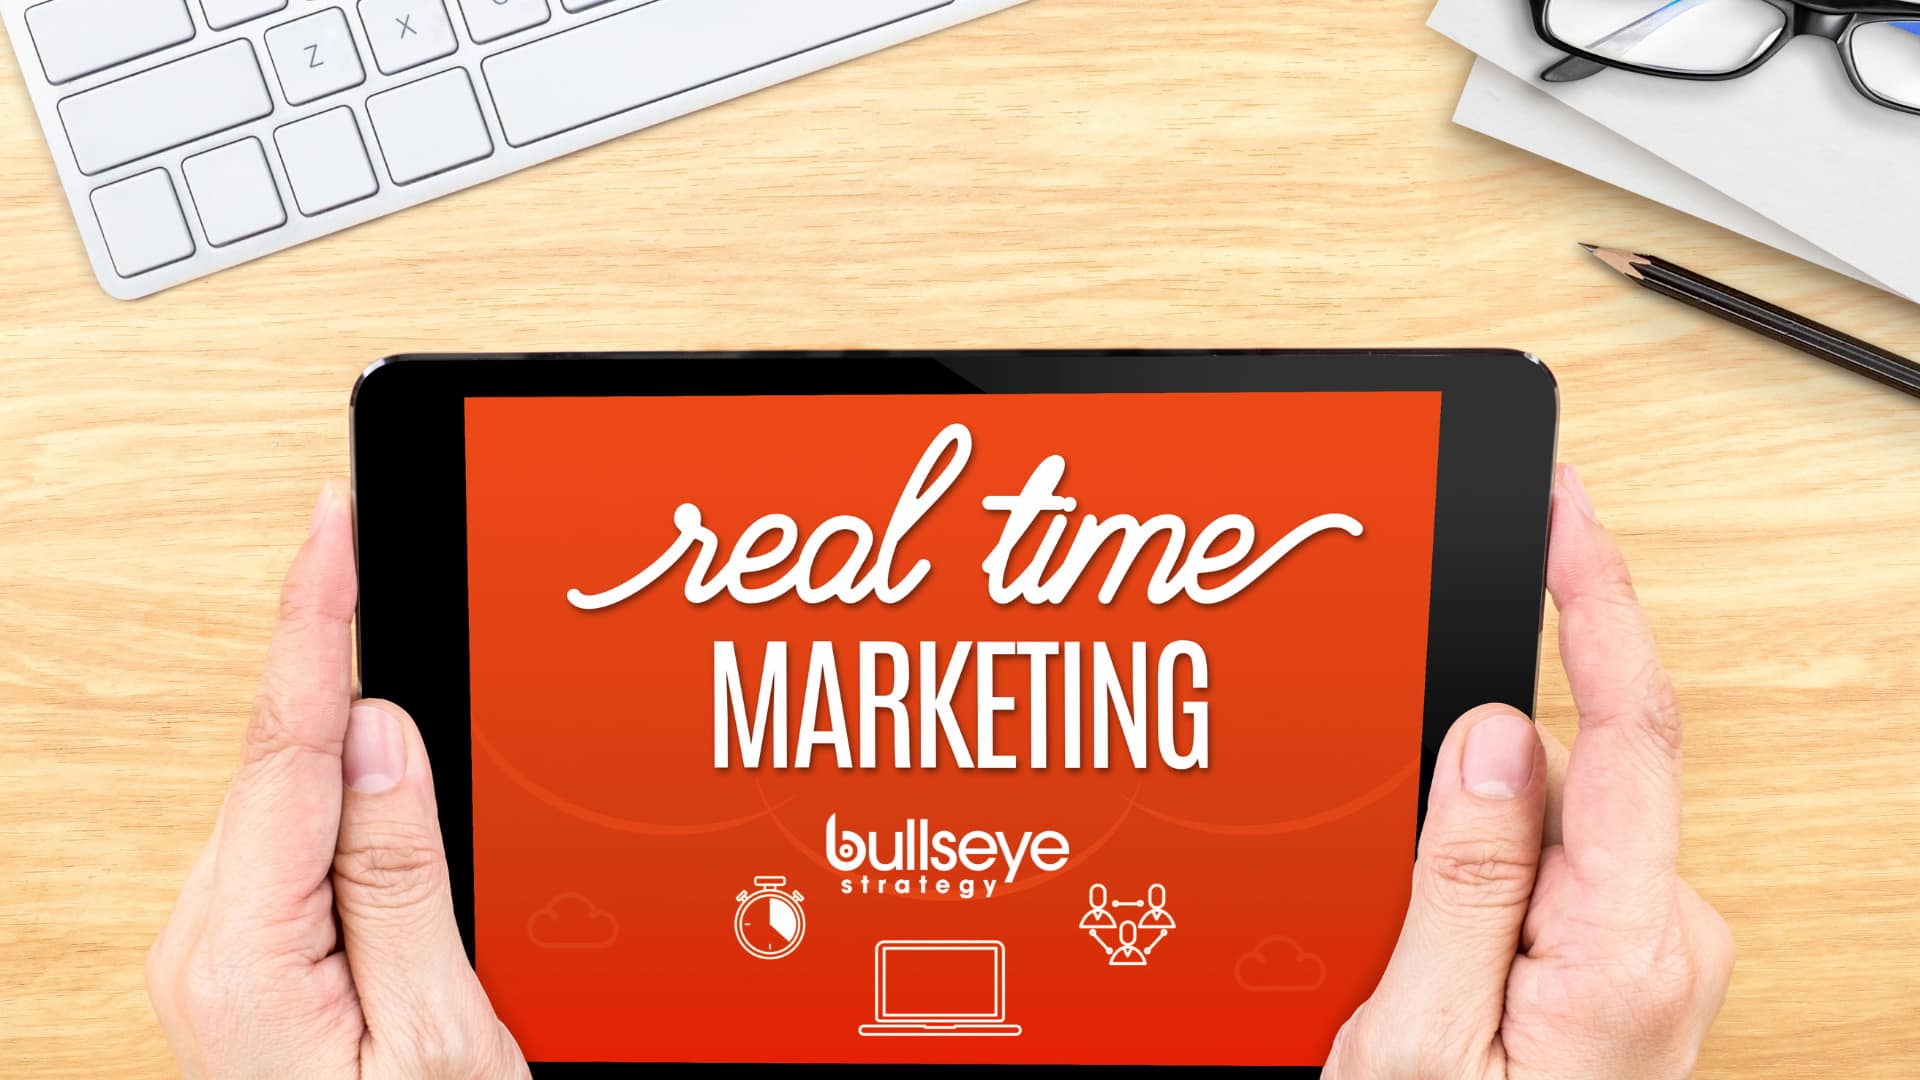 Real-time marketing helps brands react to trends and customers quickly